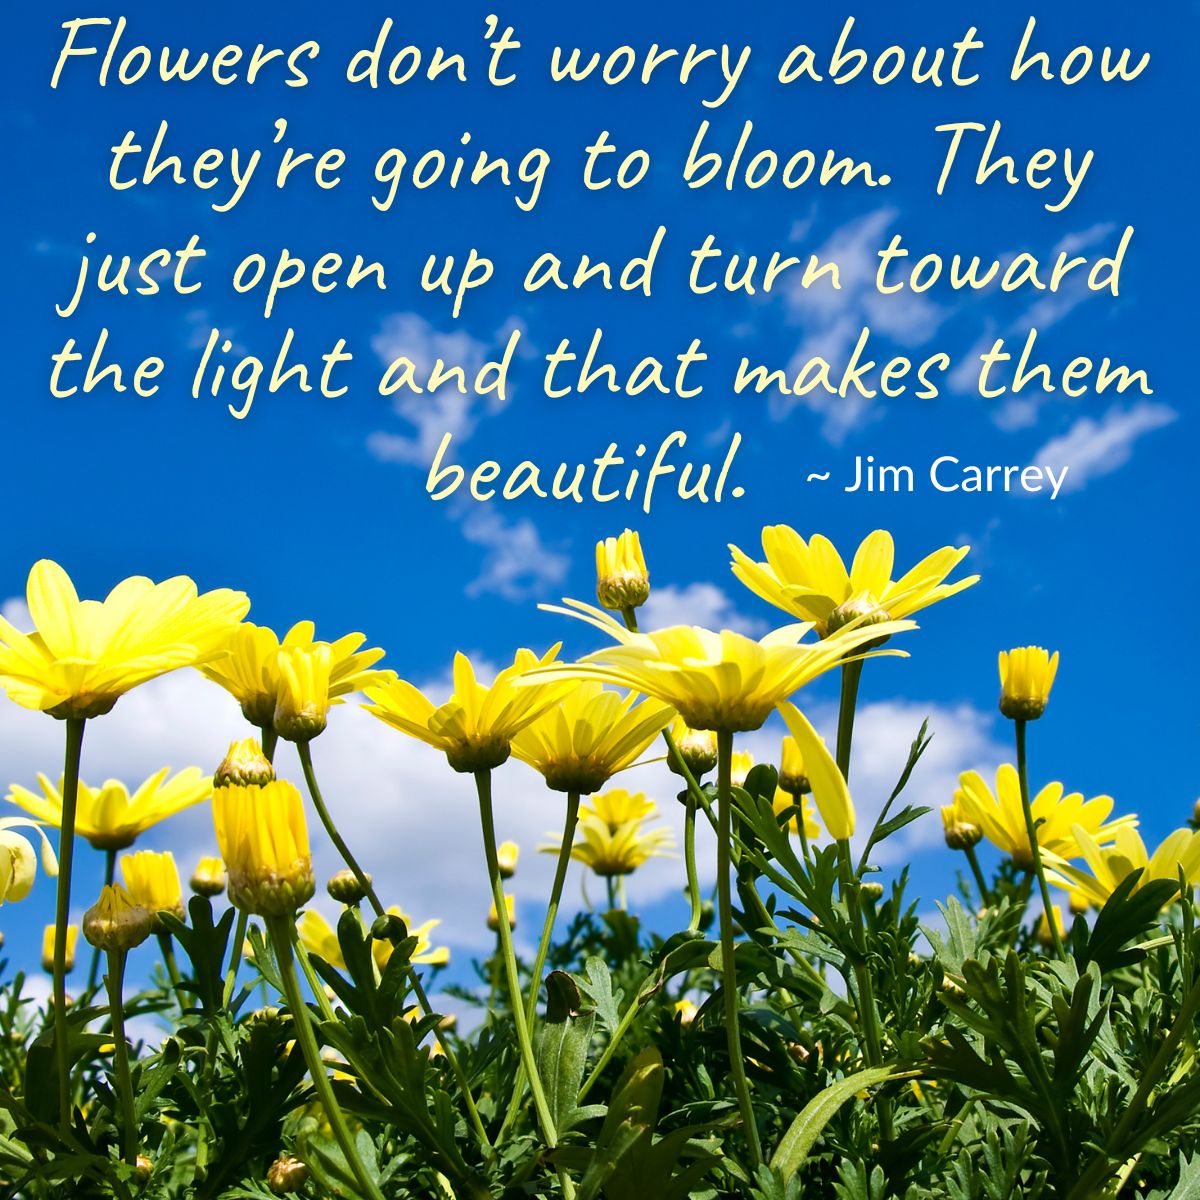 Flowers don’t worry about how they’re going to bloom. They just open up and turn toward the light and that makes them beautiful.  ~ Jim Carrey 